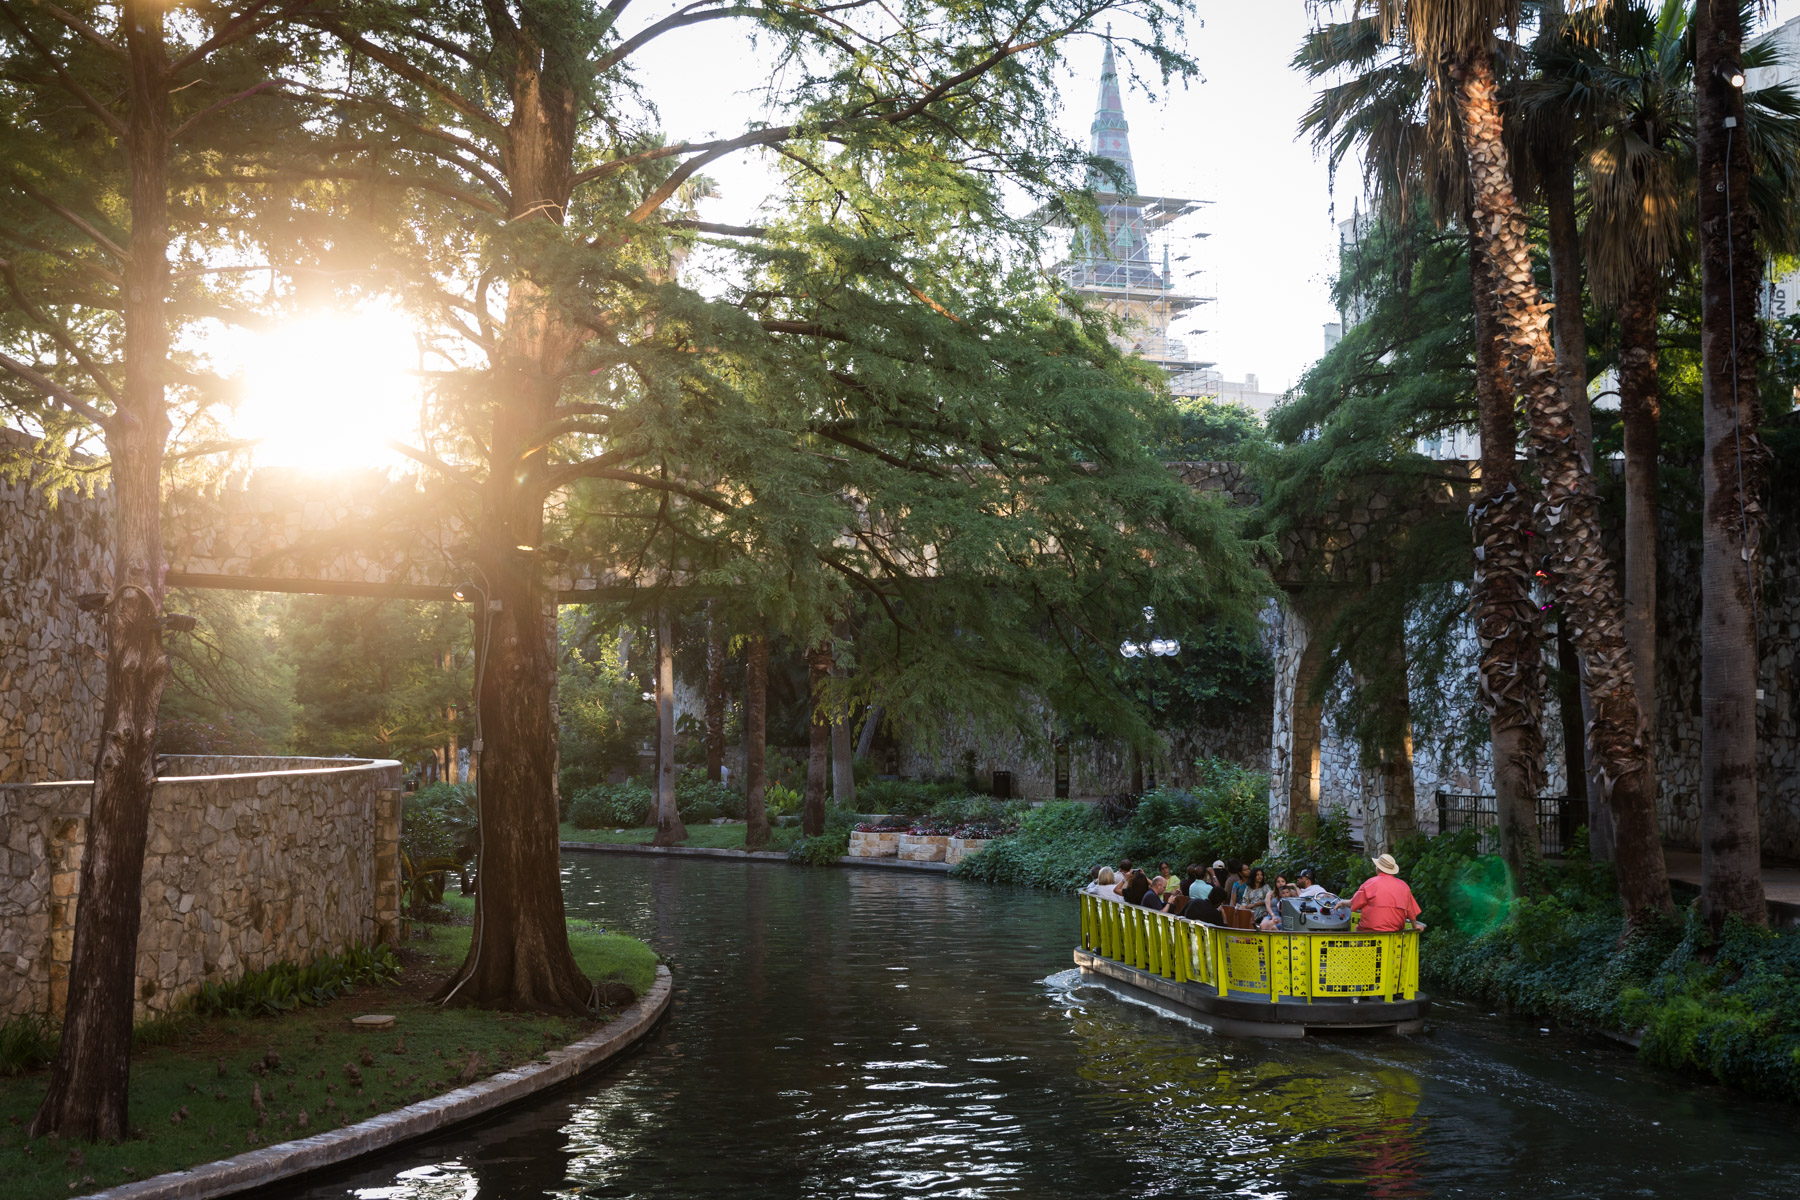 Boat carrying tourists on San Antonio River Walk for an article on the perfect downtown San Antonio family portrait itinerary